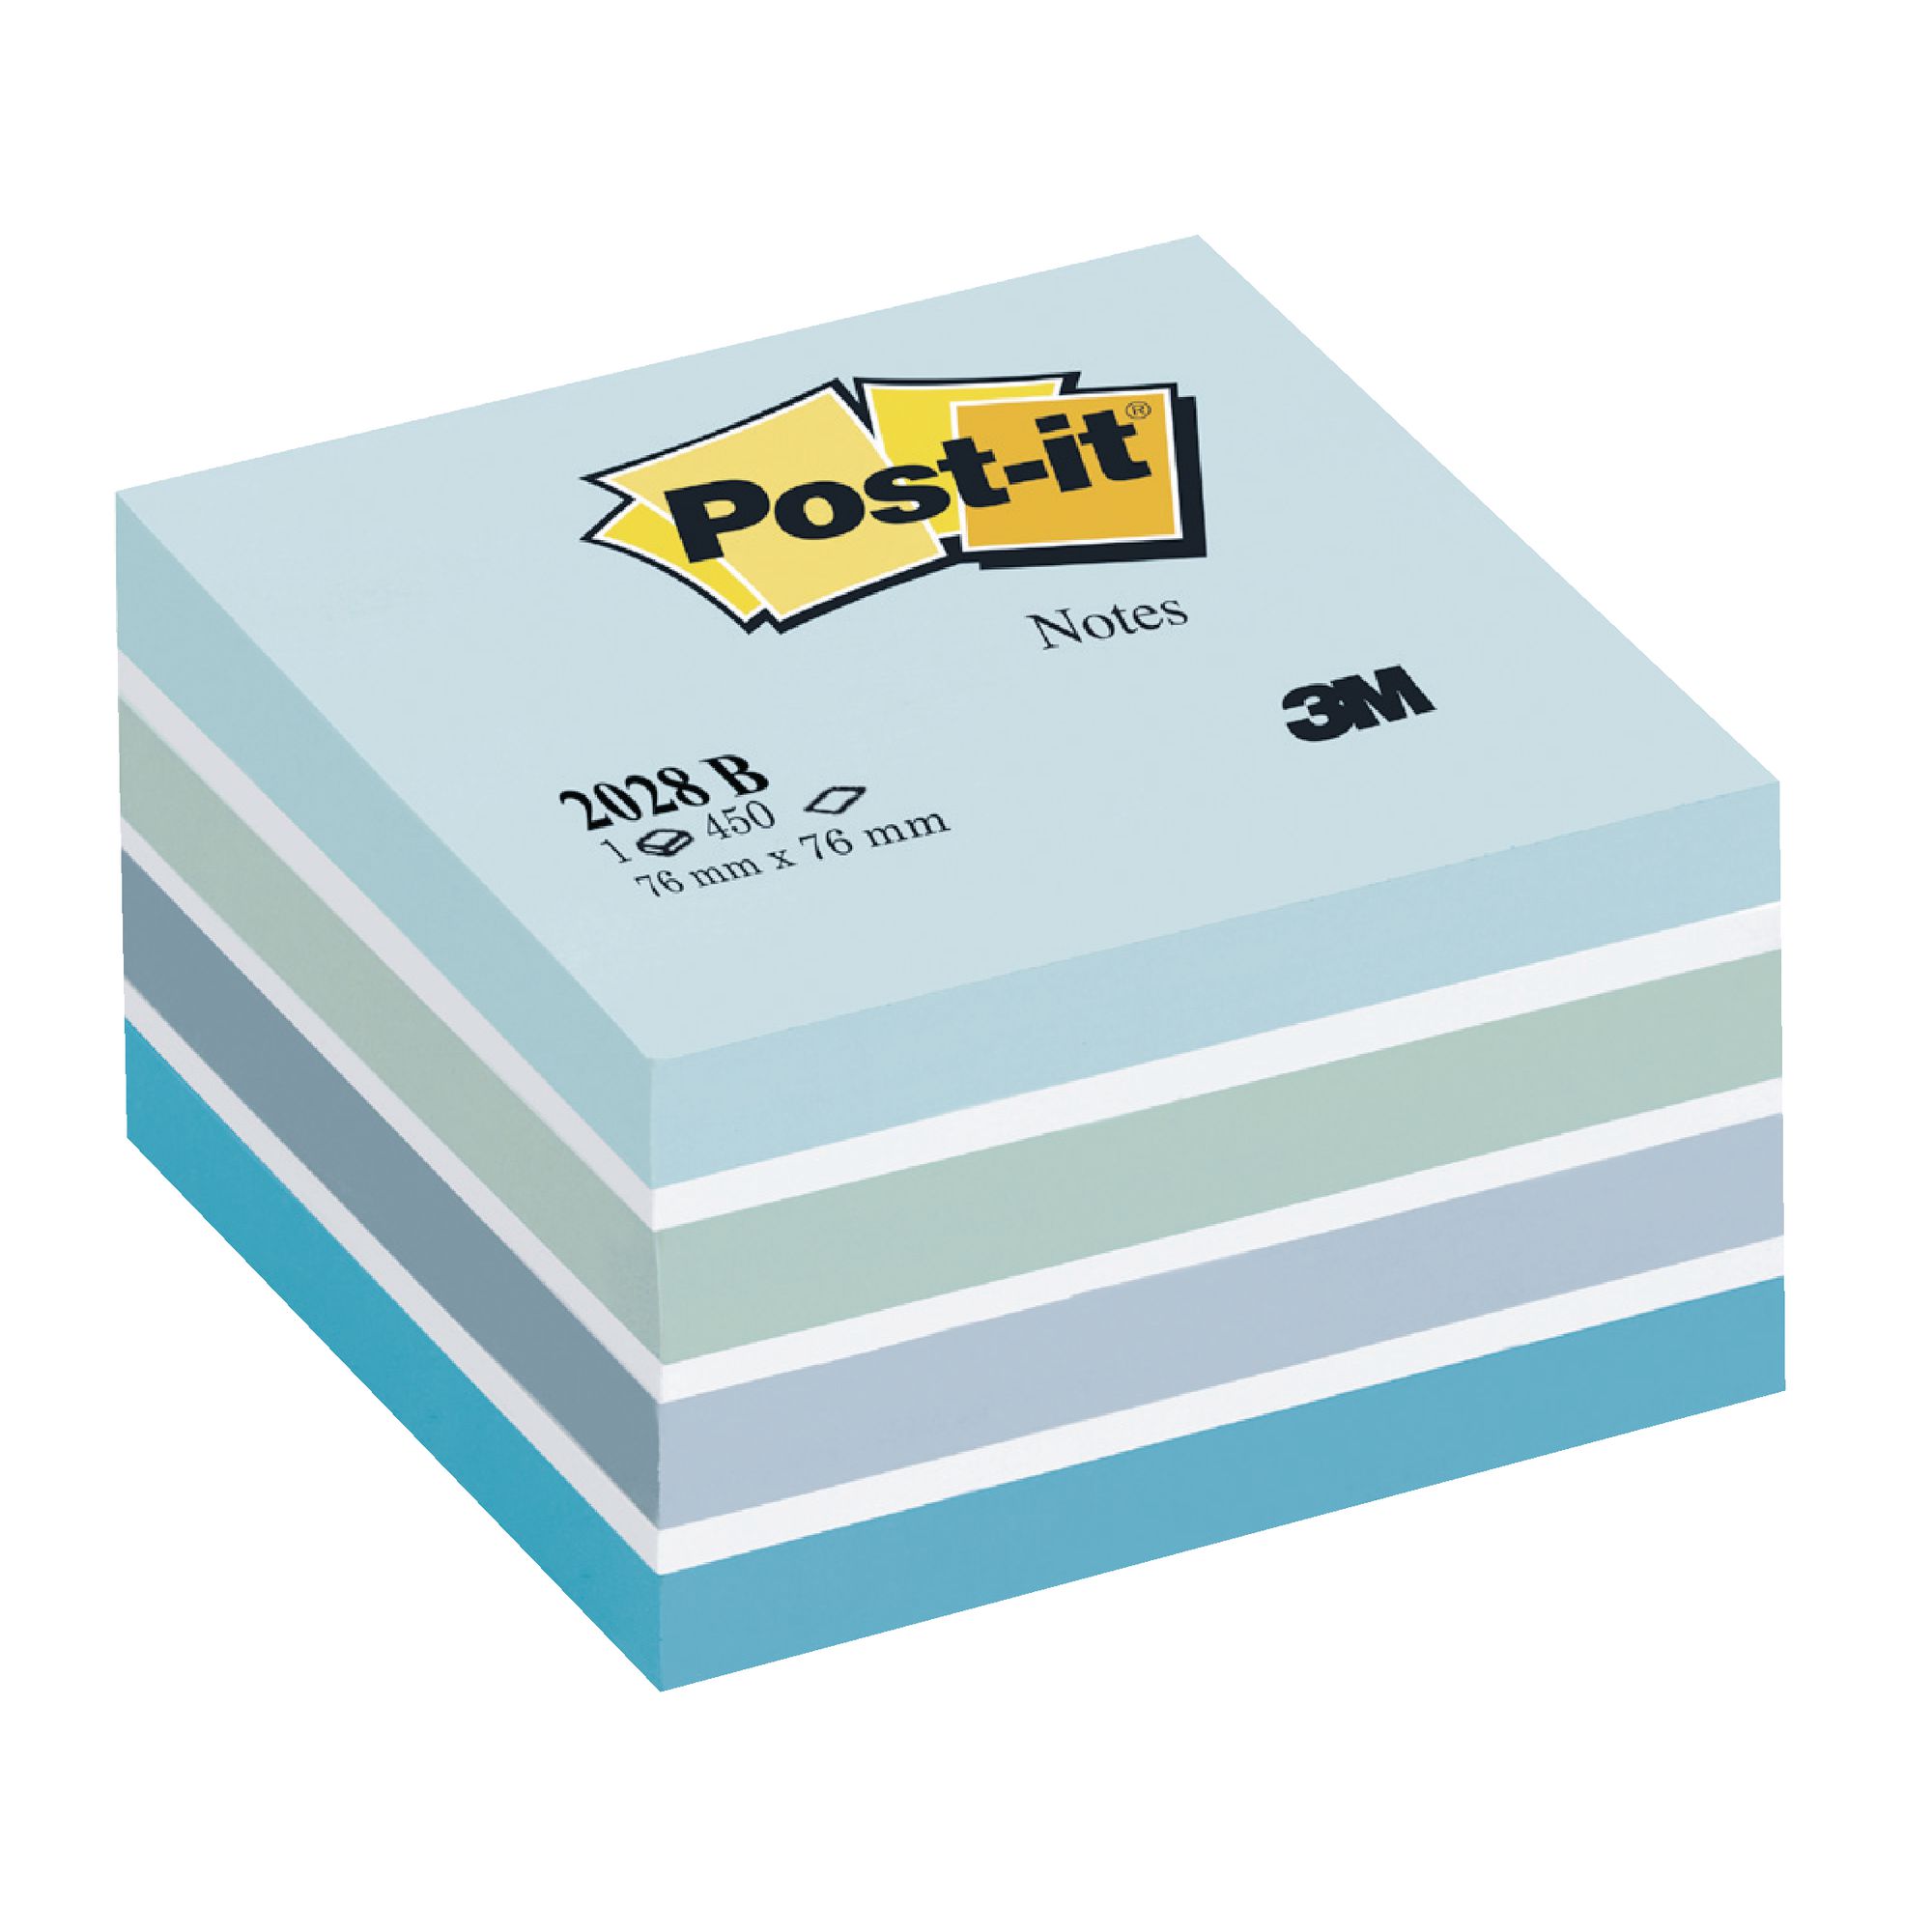 blue post it notes